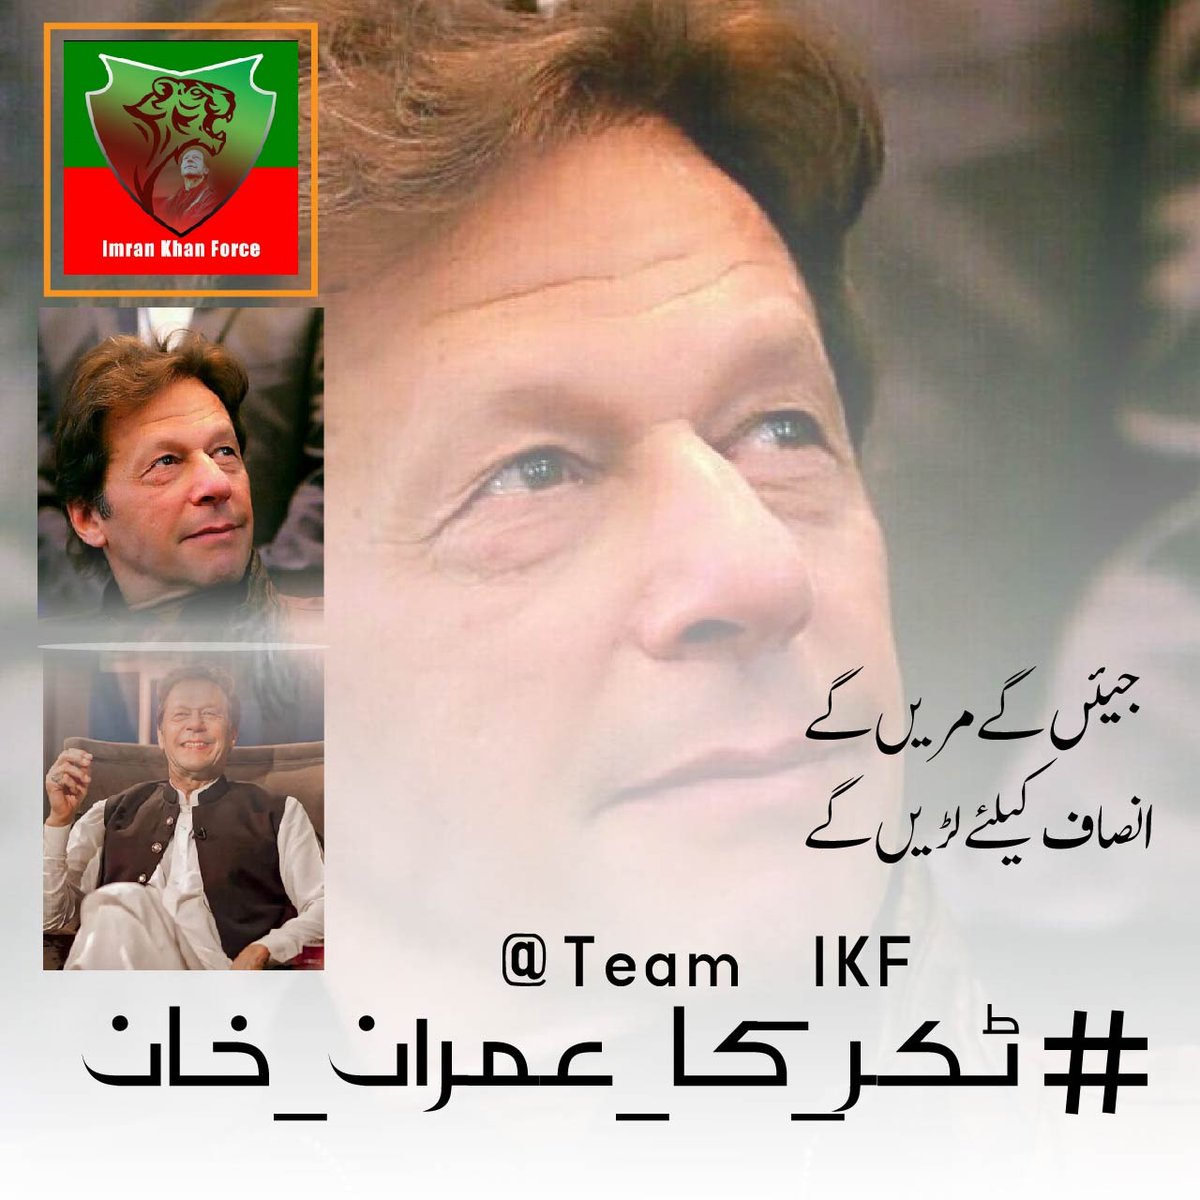 Imran Khan is ready to die but not to leave this country #ٹکر_کا_عمران_خان @Team_IKF